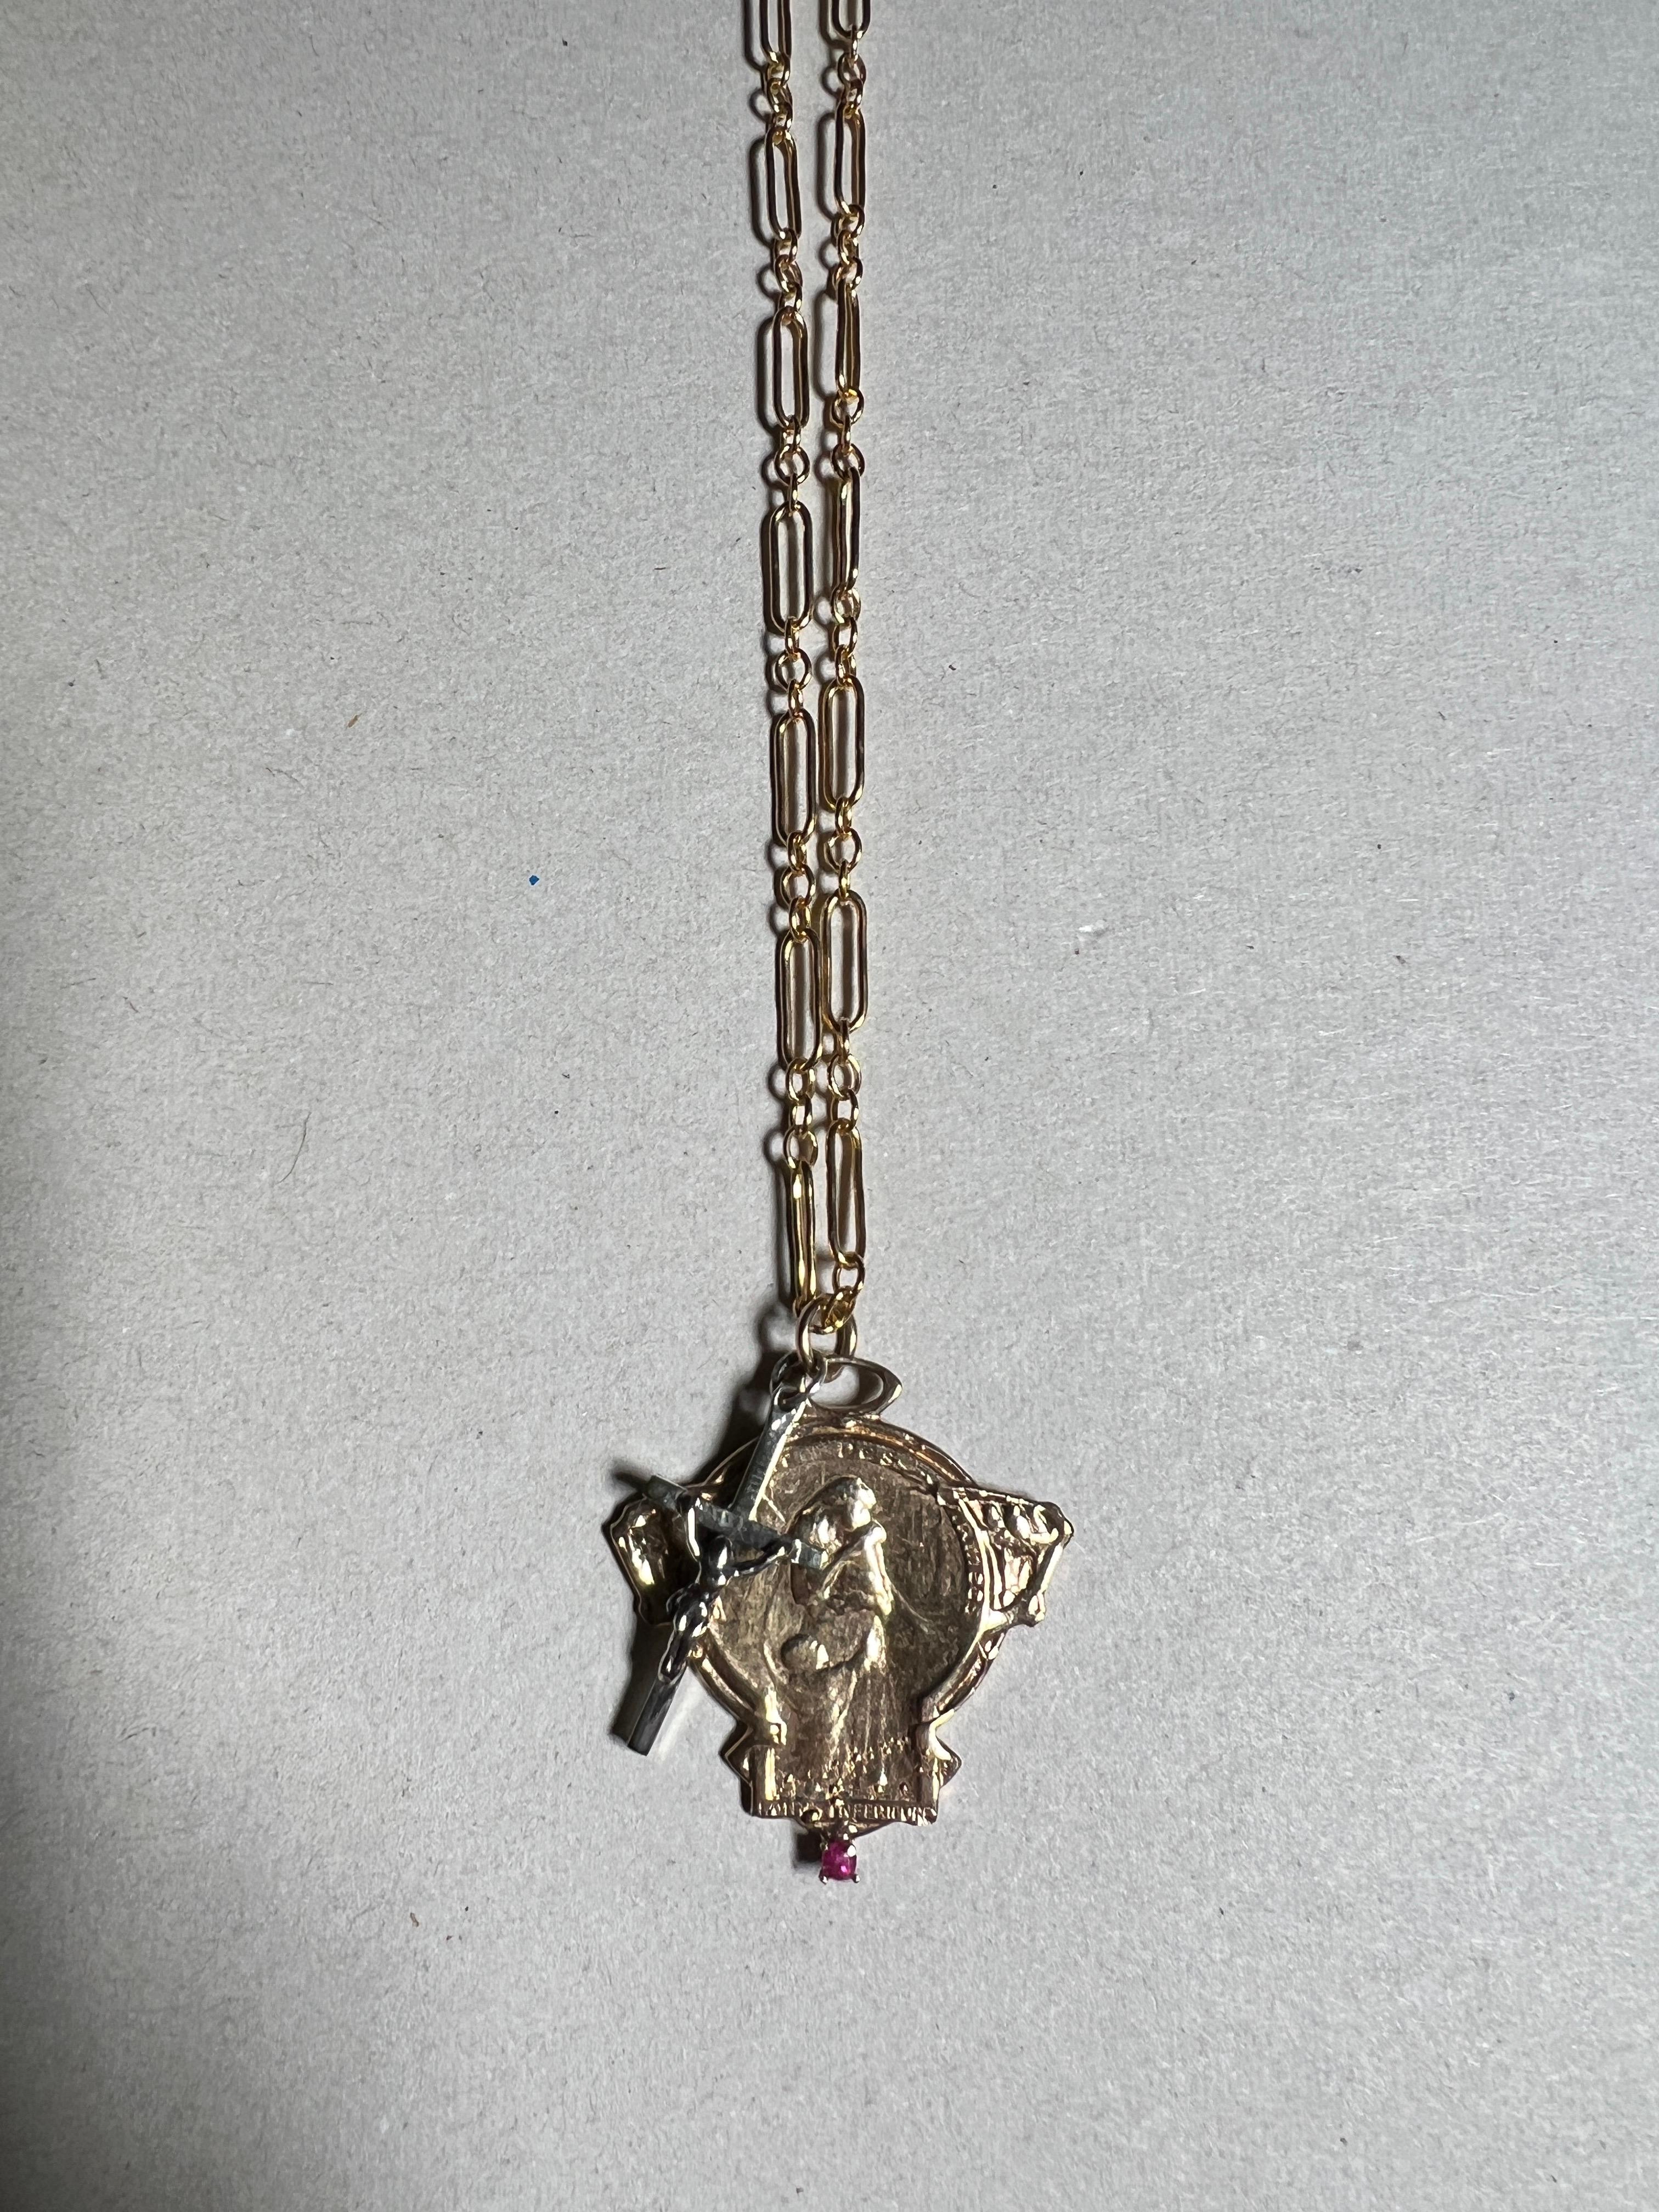 Art Nouveau French Medal Ruby Chain Necklace Silver Cross J Dauphin For Sale 5